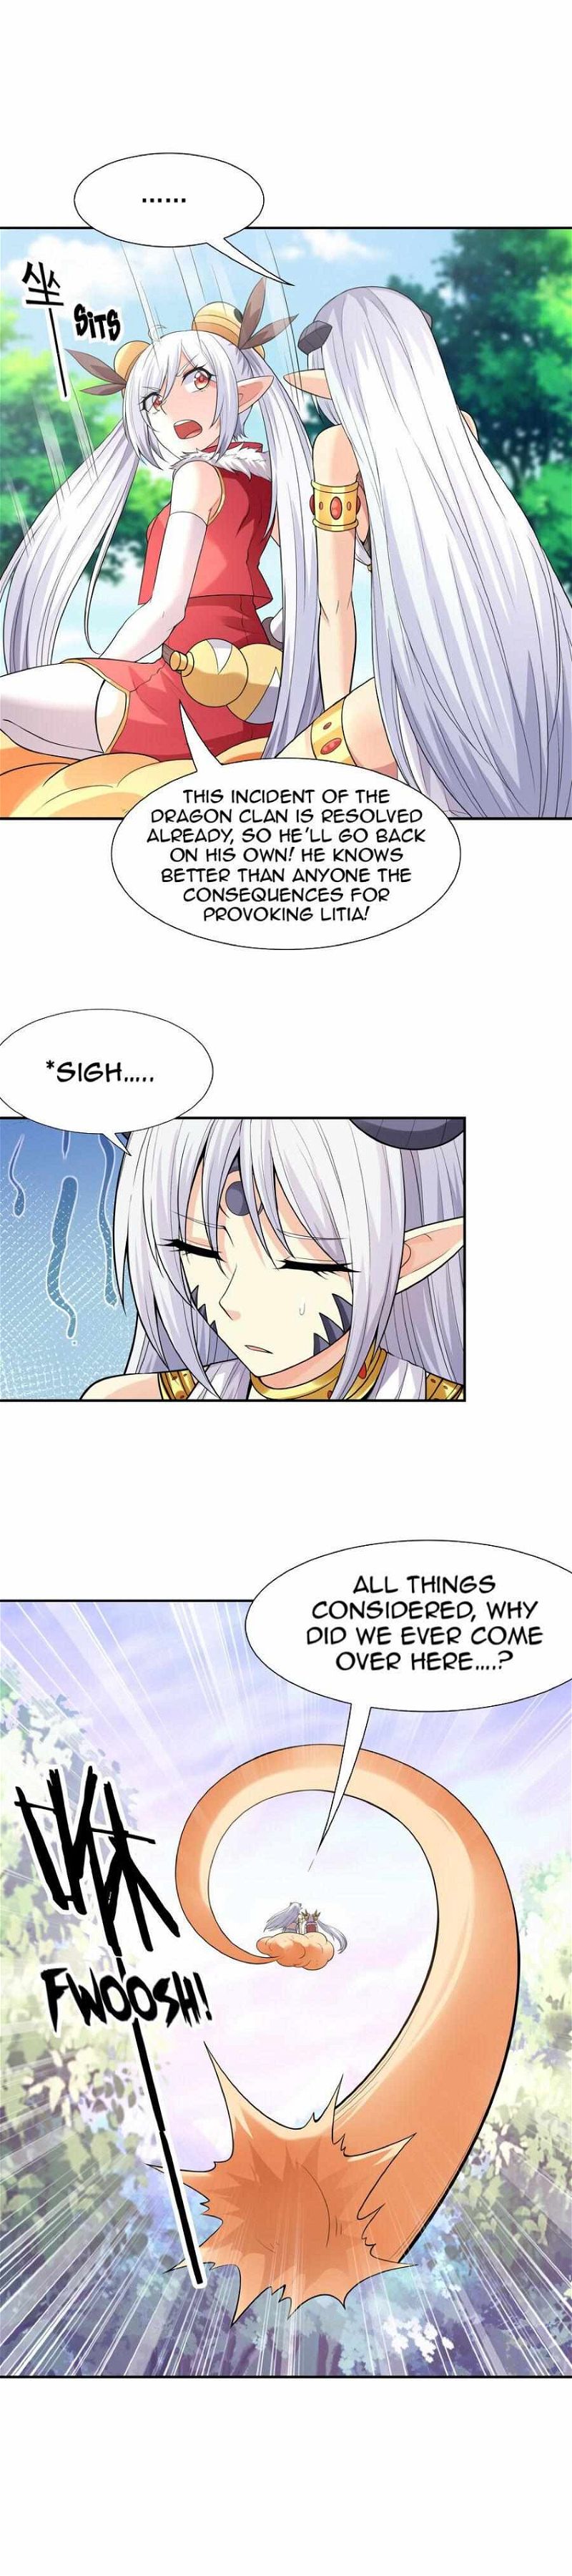 My Harem Consists Entirely of Female Demon Villains Chapter 37 page 5